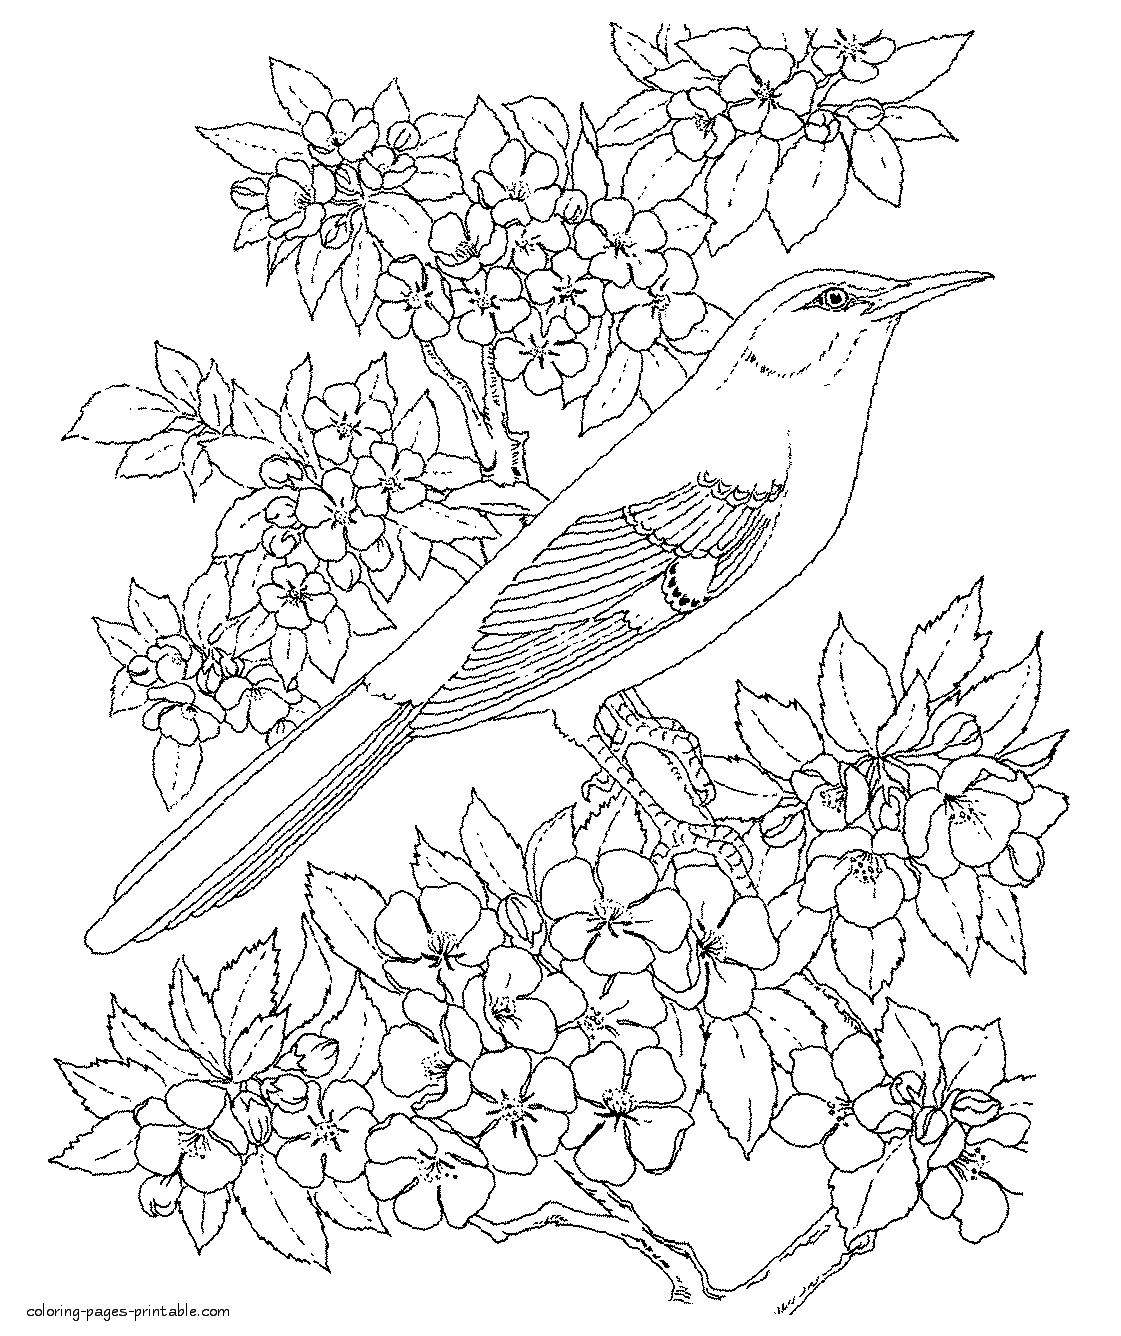 Bird Colouring Pages For Adults    COLORING PAGES PRINTABLE.COM